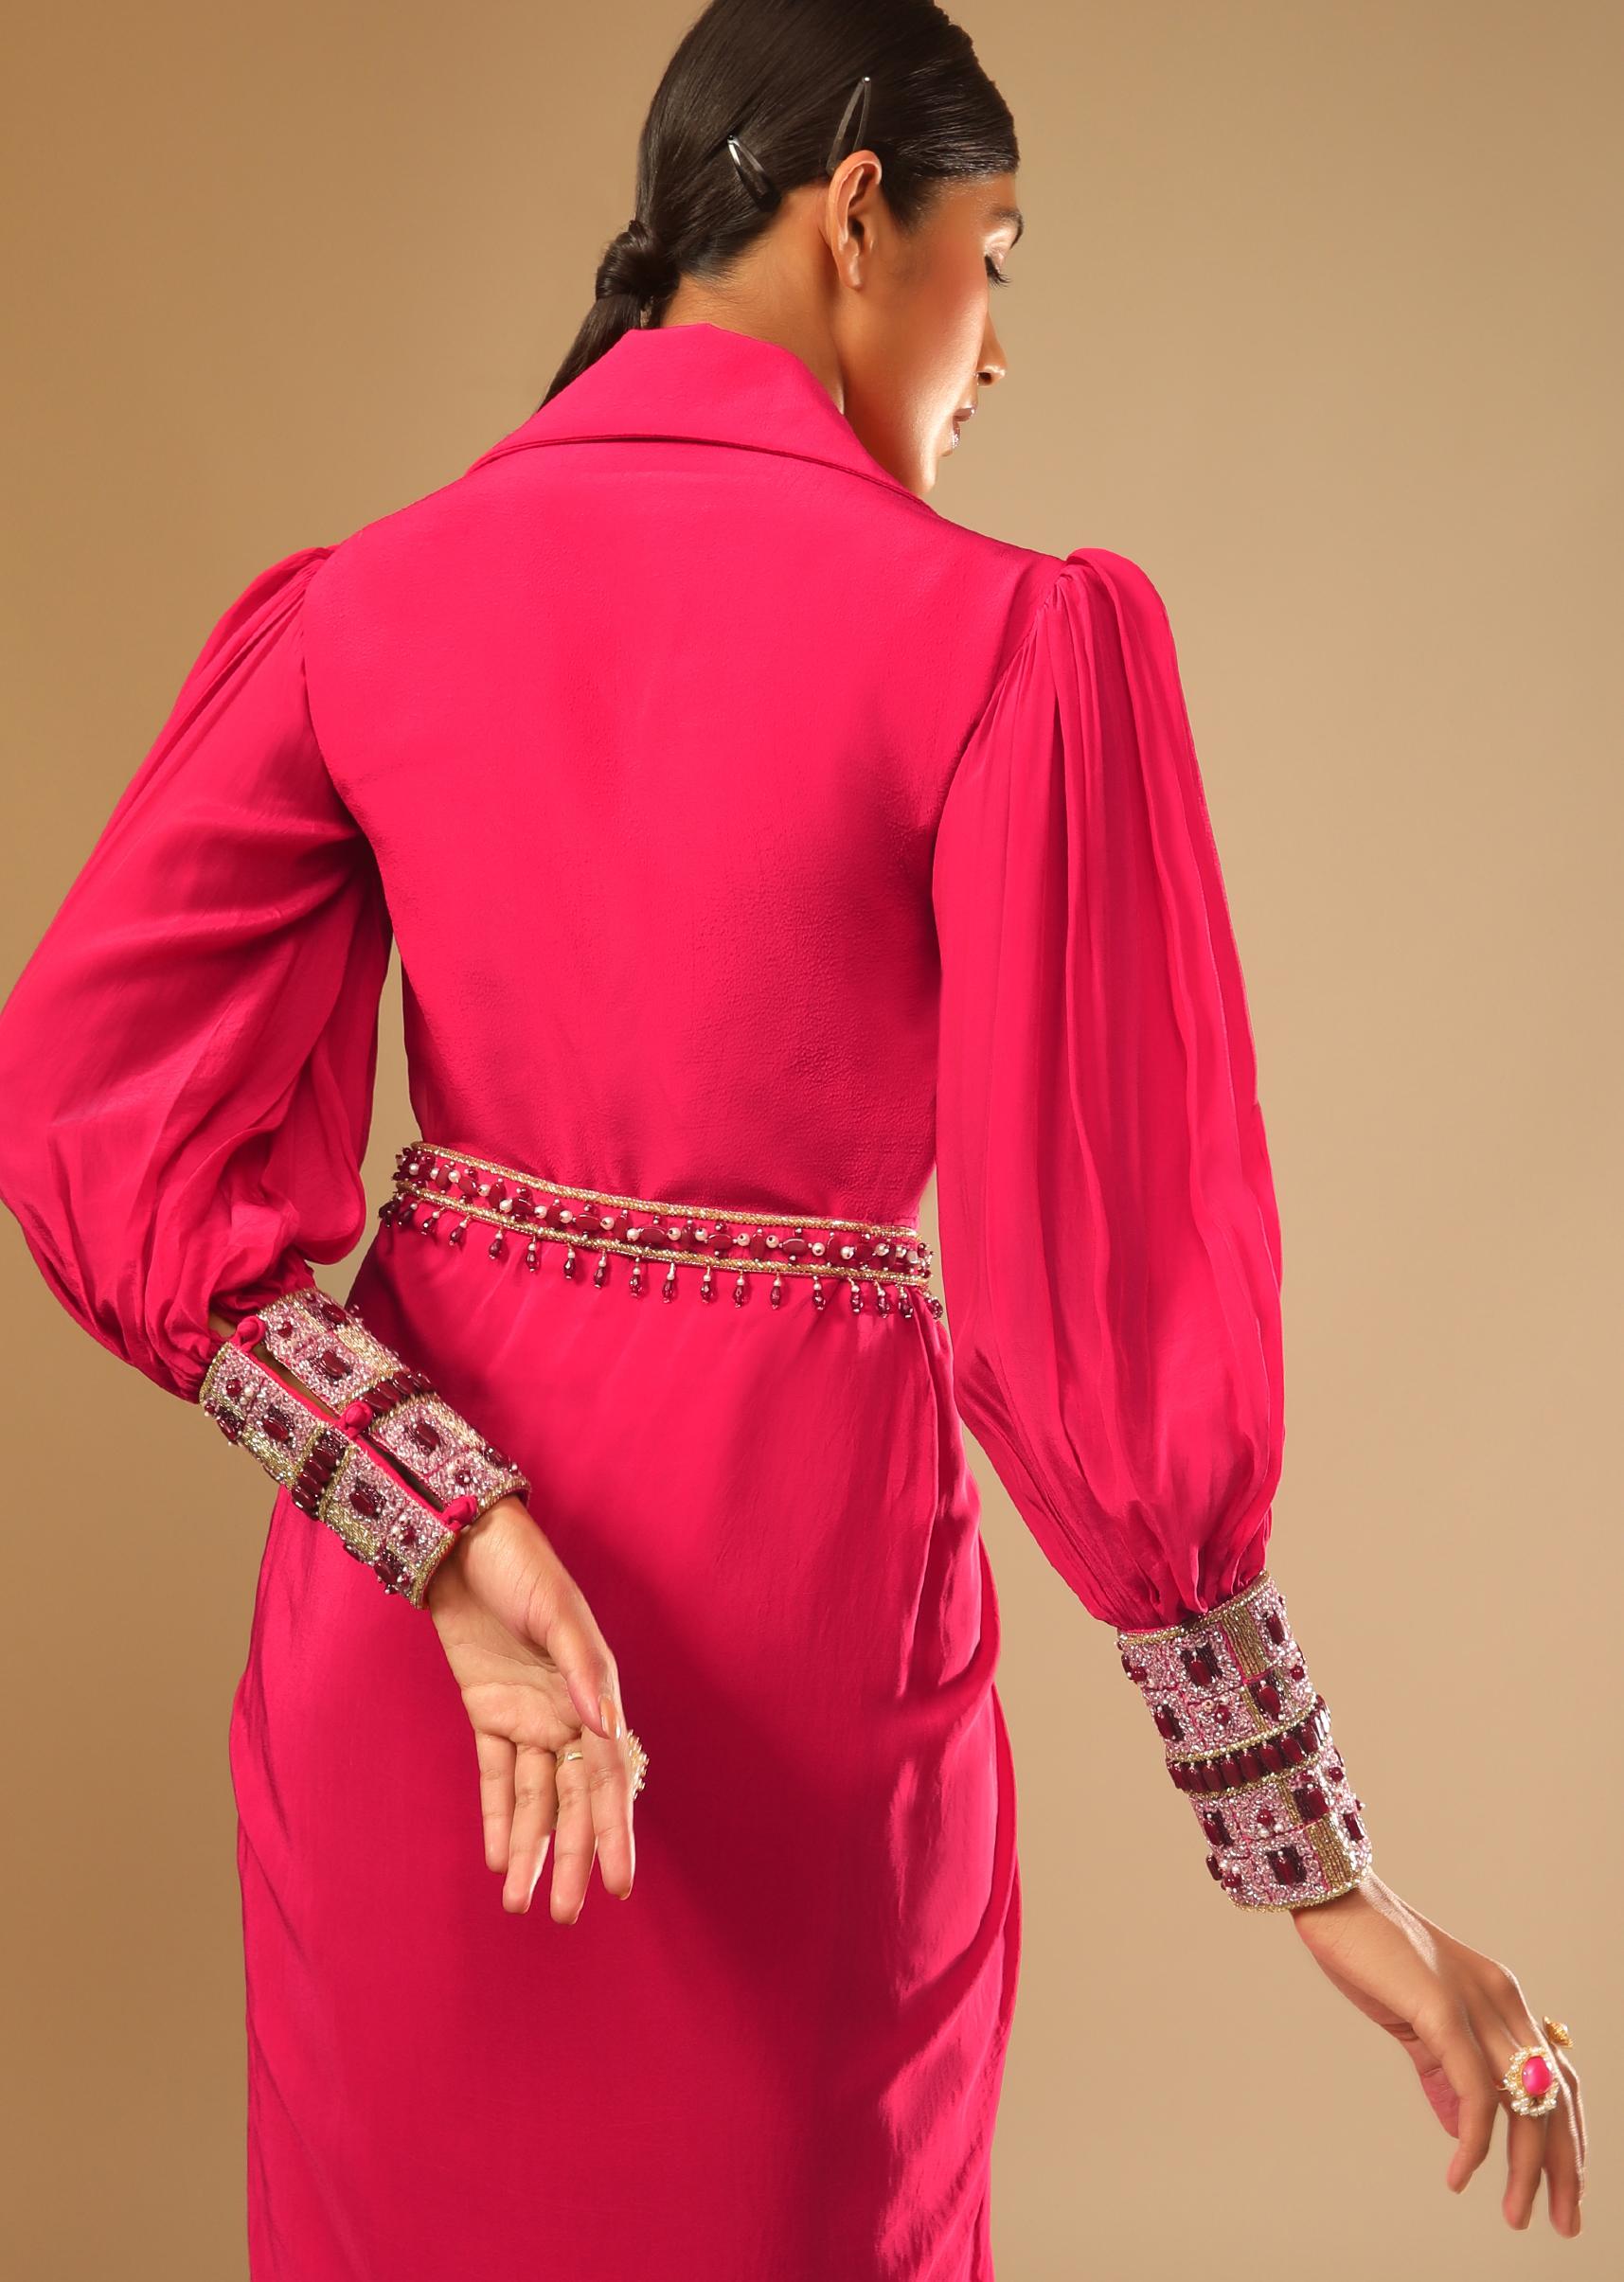 Kalki Fashion,M001AT403Y-SG73175,Hot Pink Dress With A Chunky Embroidered Bishop Sleeves And Collar Neckline